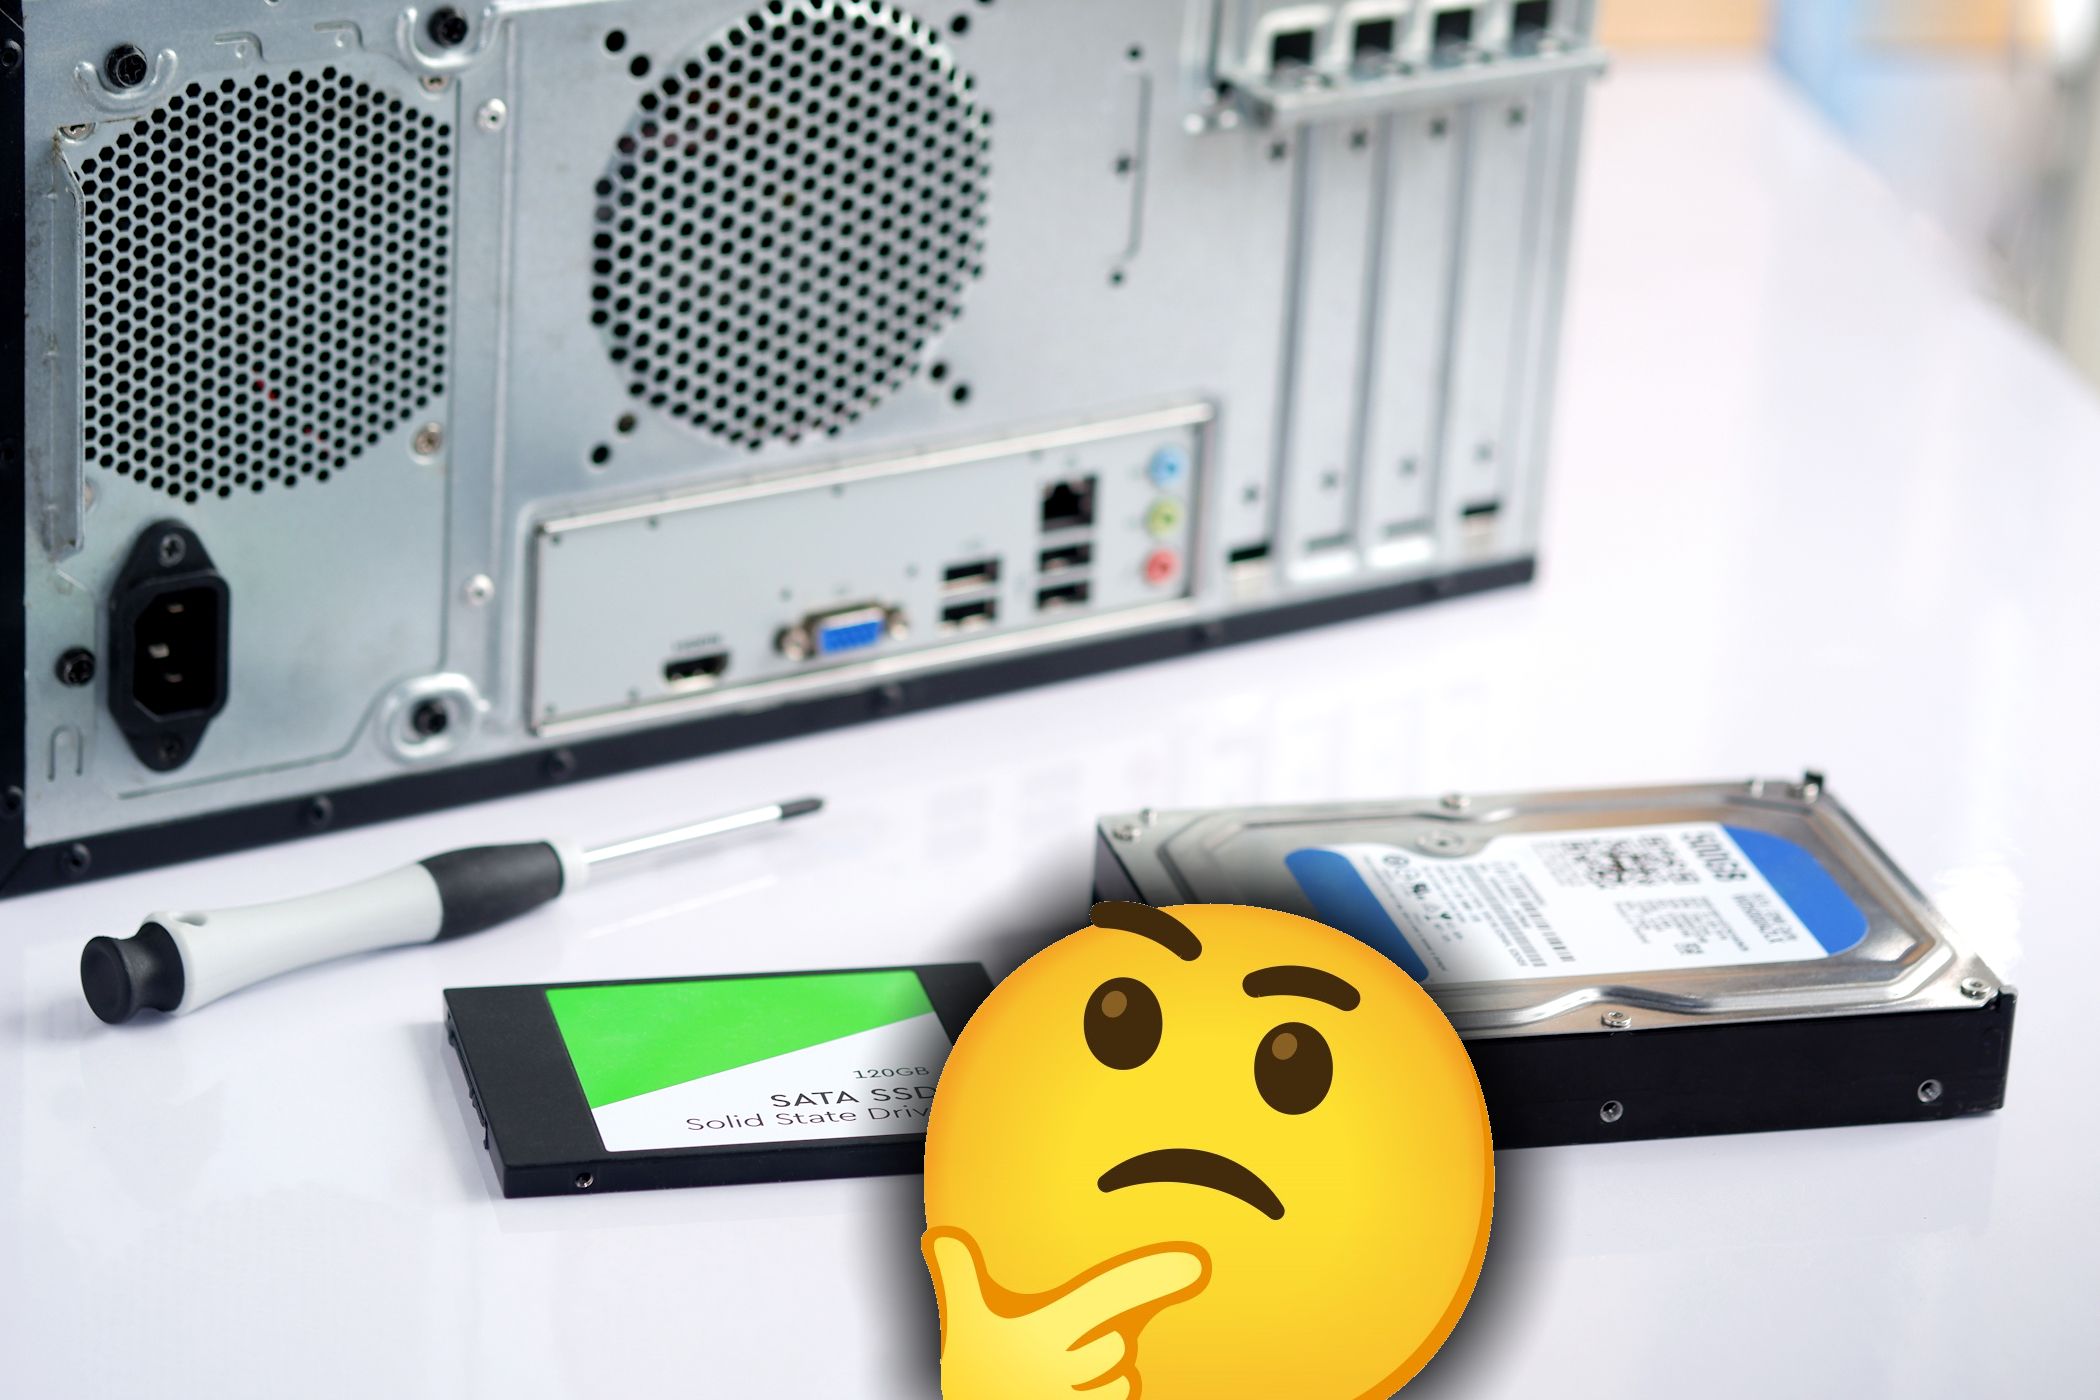 ssd hdd in front of pc case with emoji